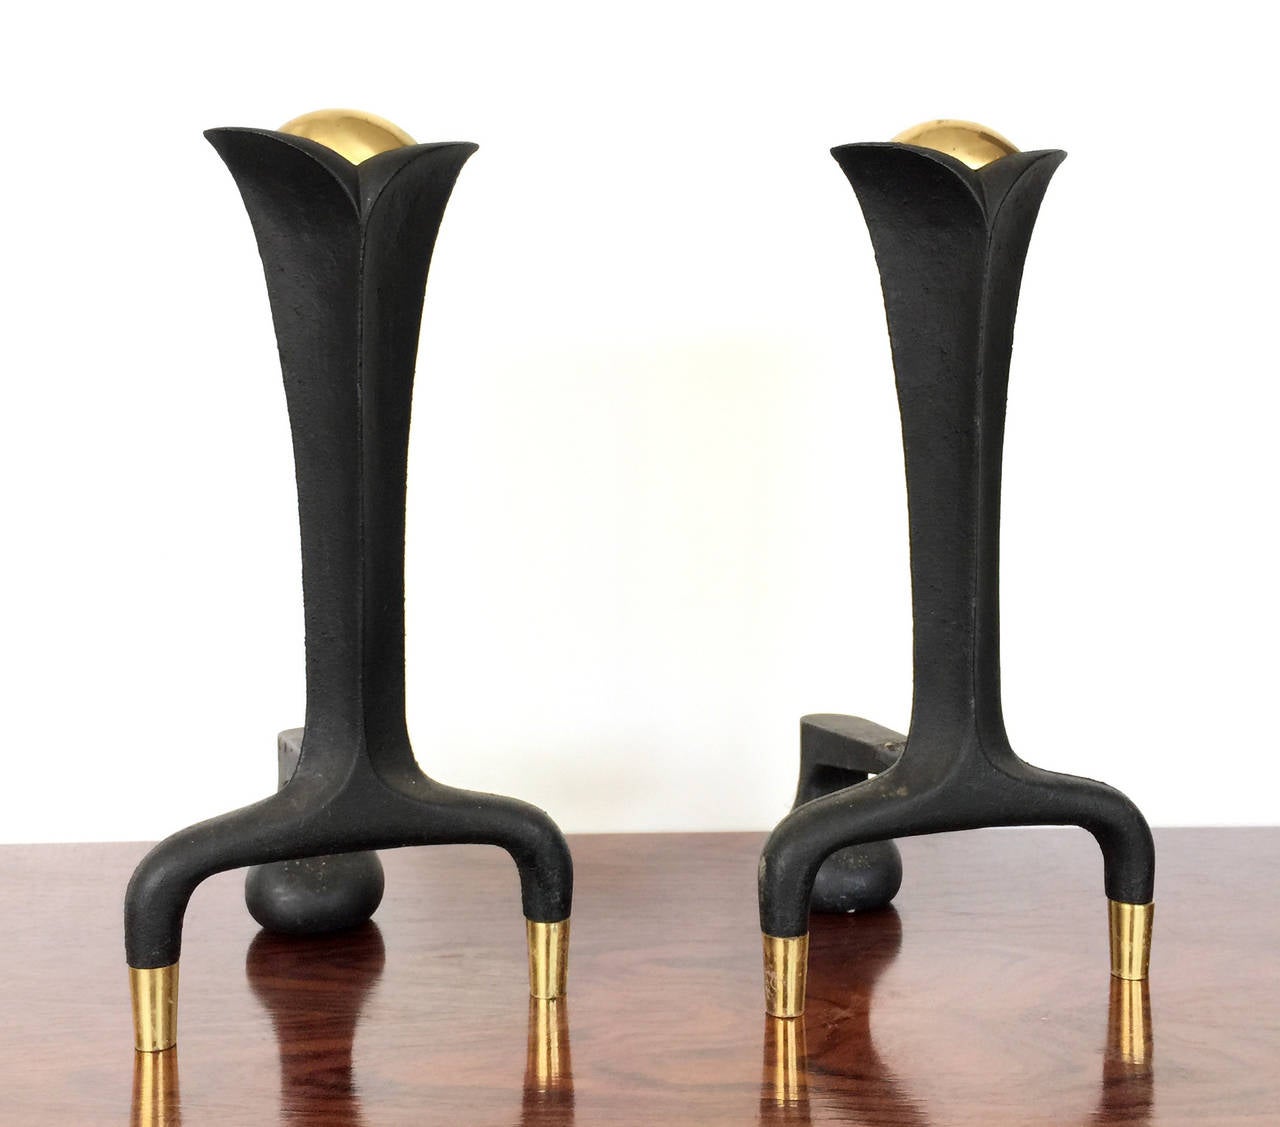 Very impressive black and gold Mid-Century Modern fireplace andirons designed by Donald Deskey for Ward Bennett.